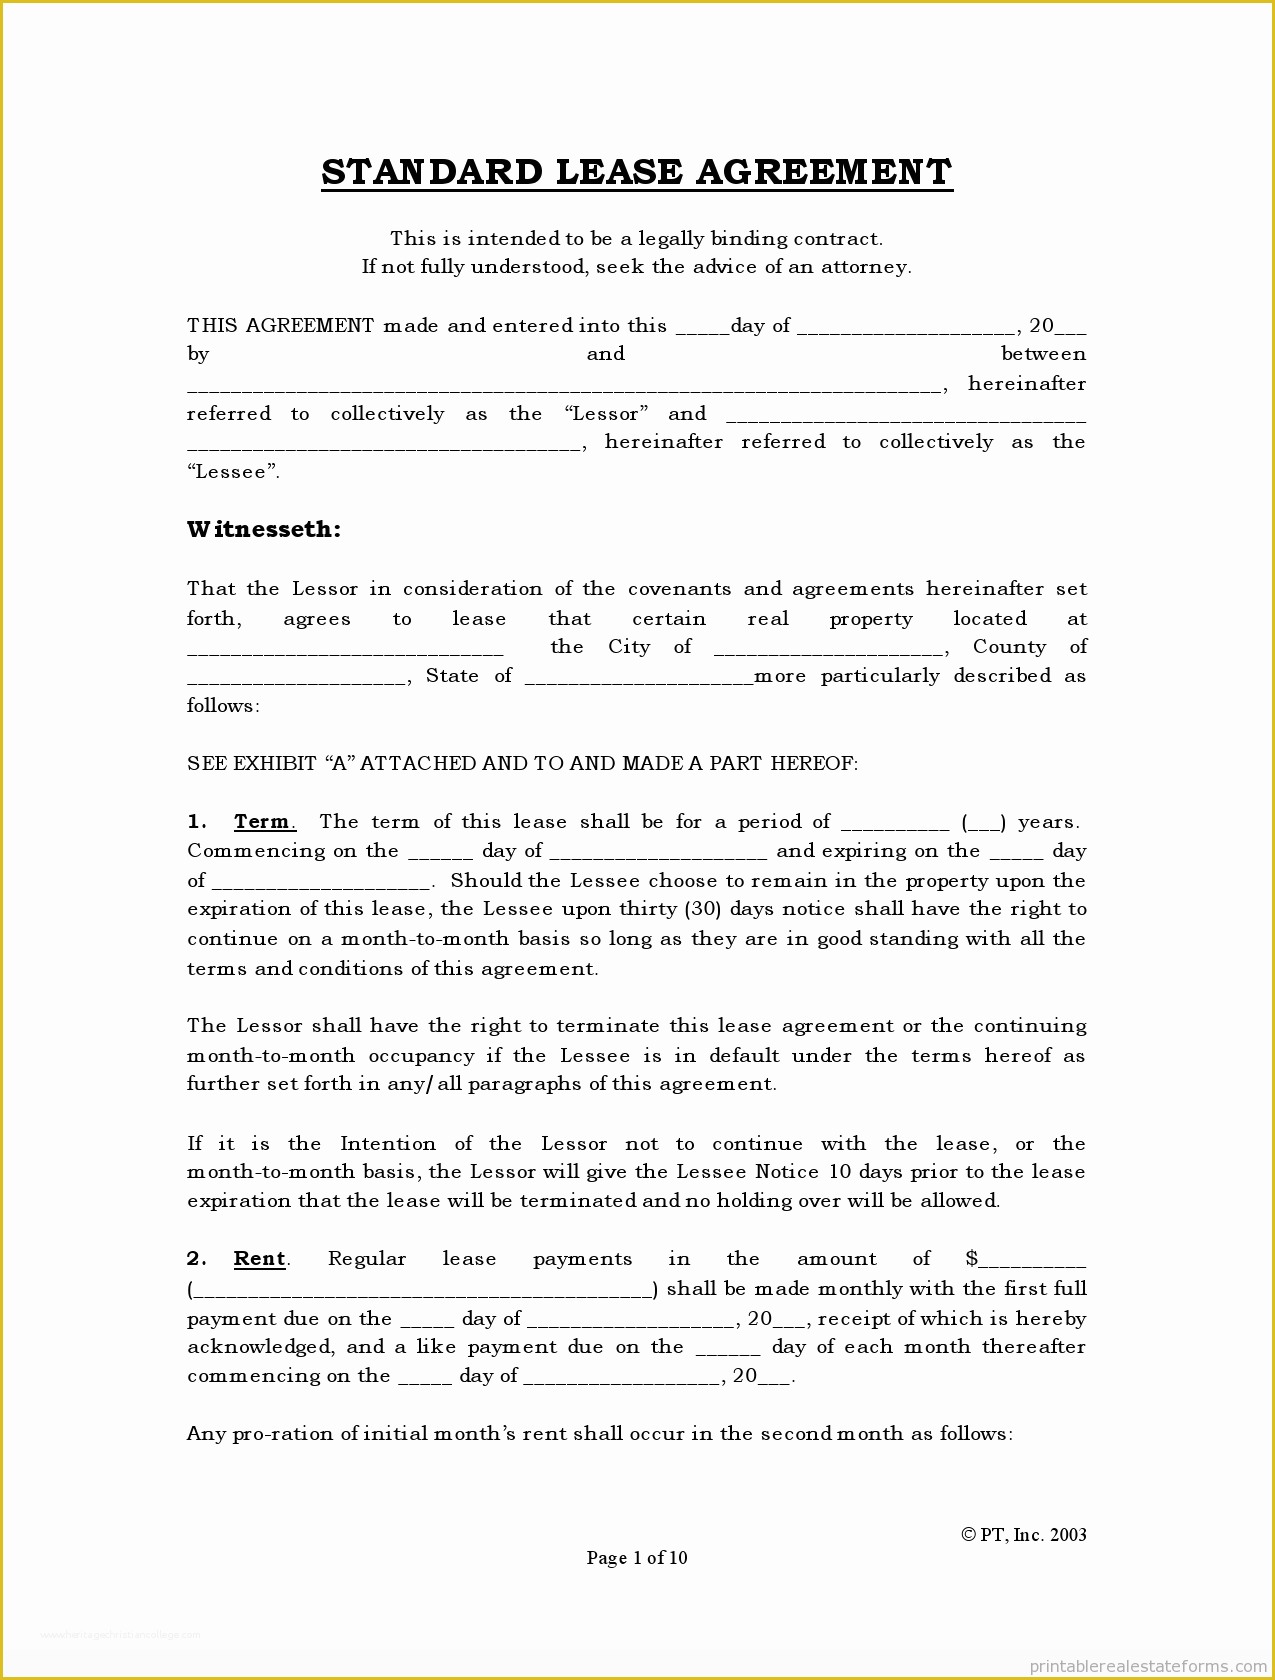 Free Online Lease Template Of Free Rental Agreements to Print